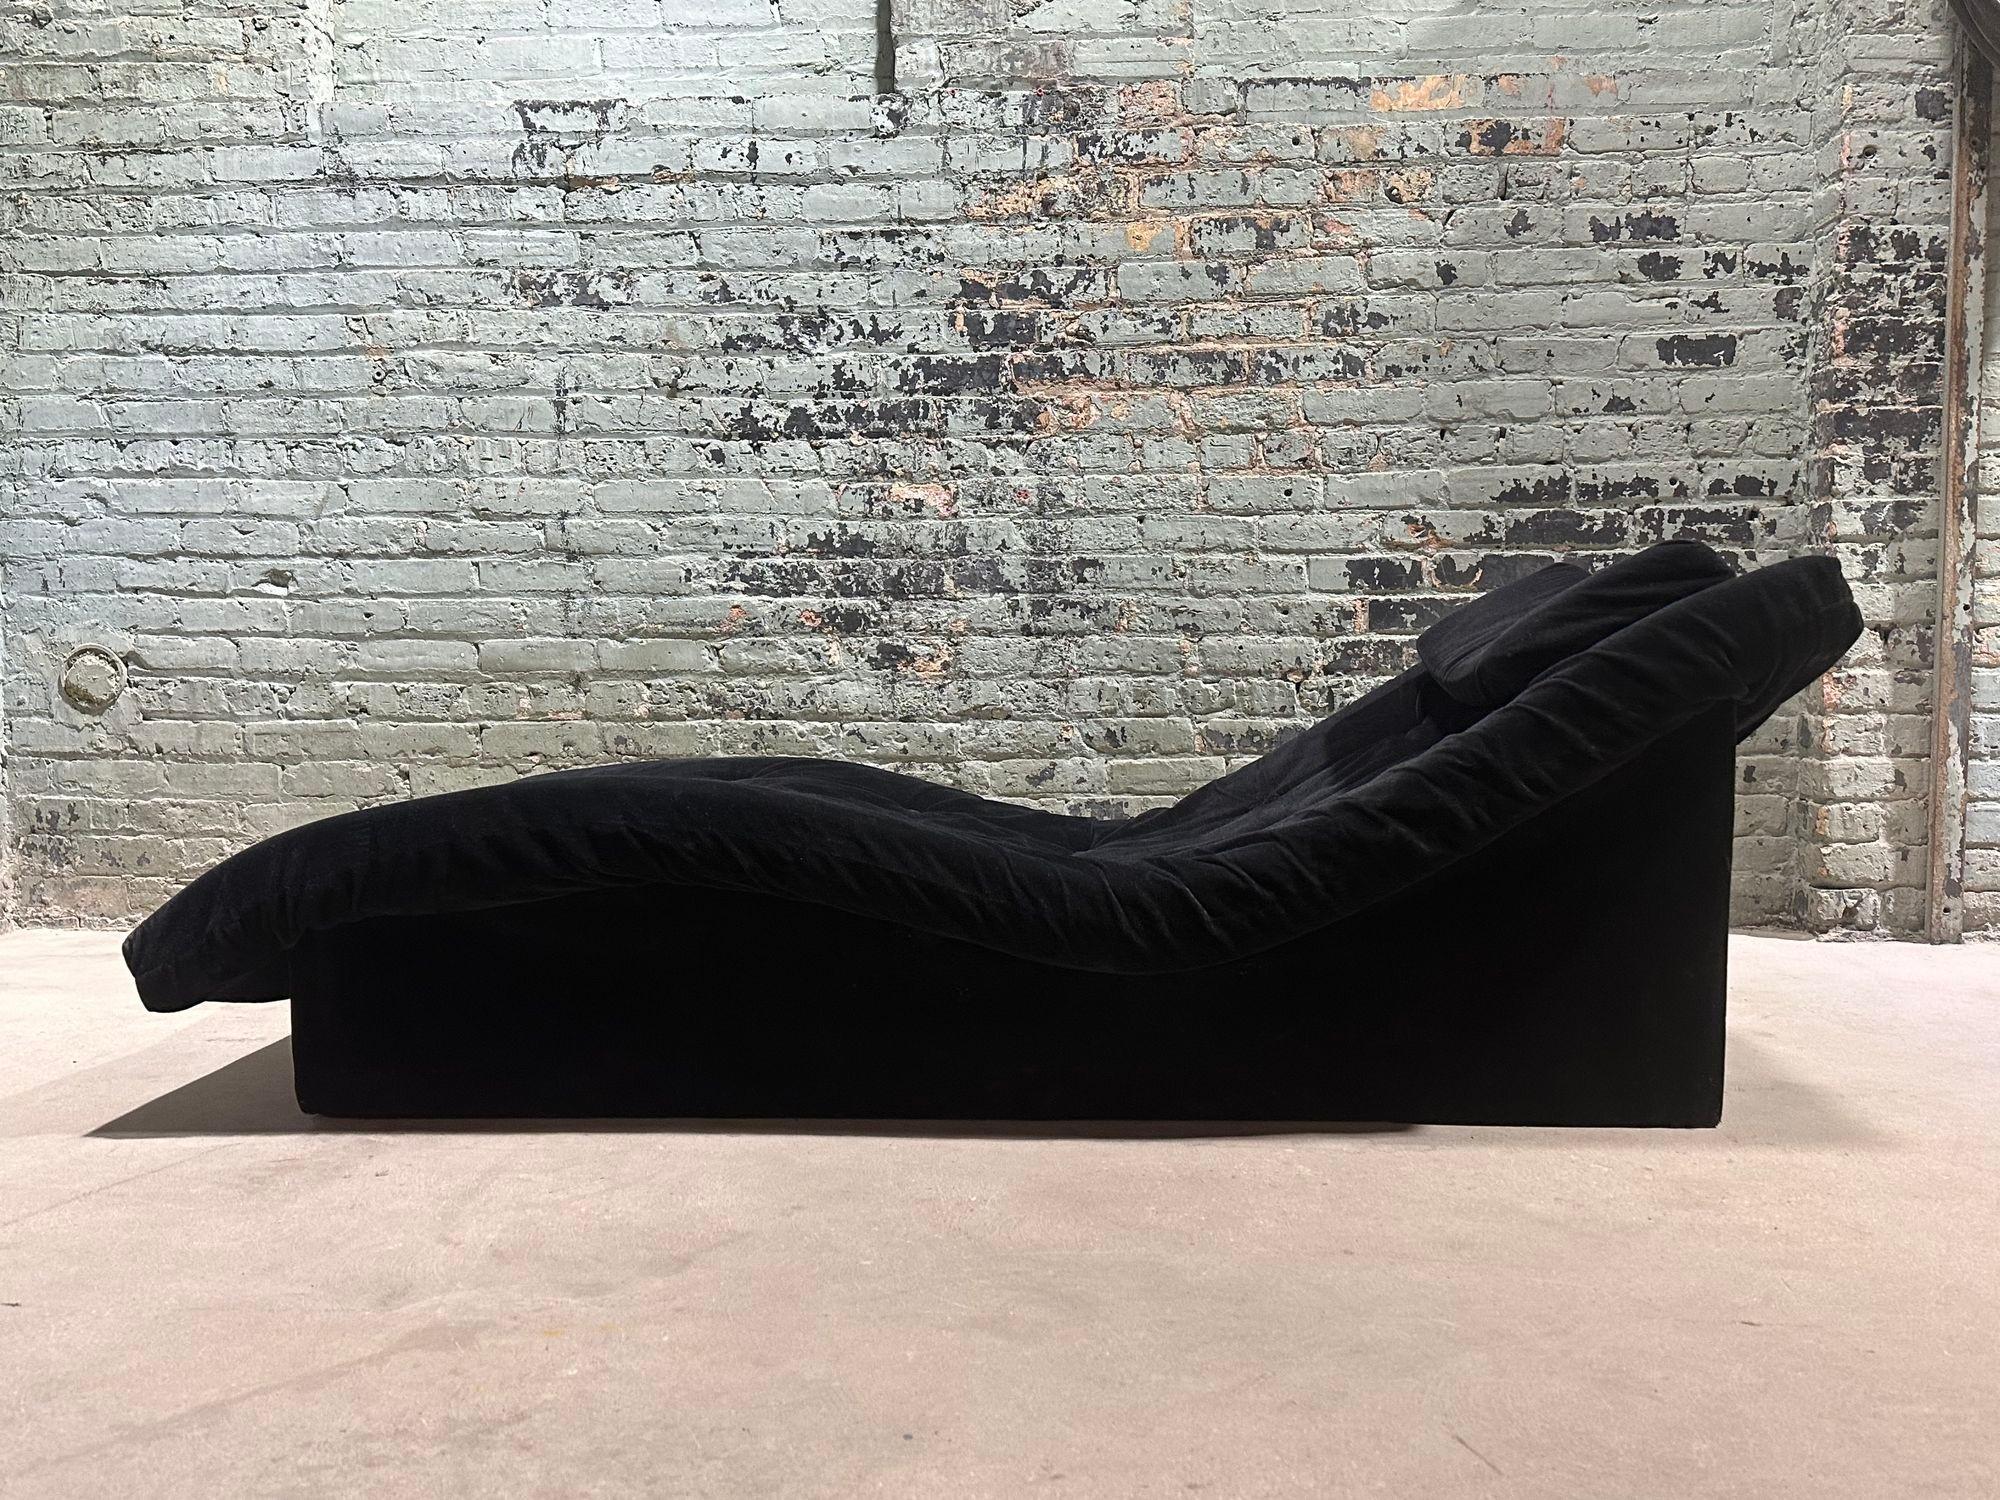 Wave Chaise Lounge Chair Style of Adrian Pearsall, 1960. Original velvet upholstery. Upholstery recommended.
Measures 70